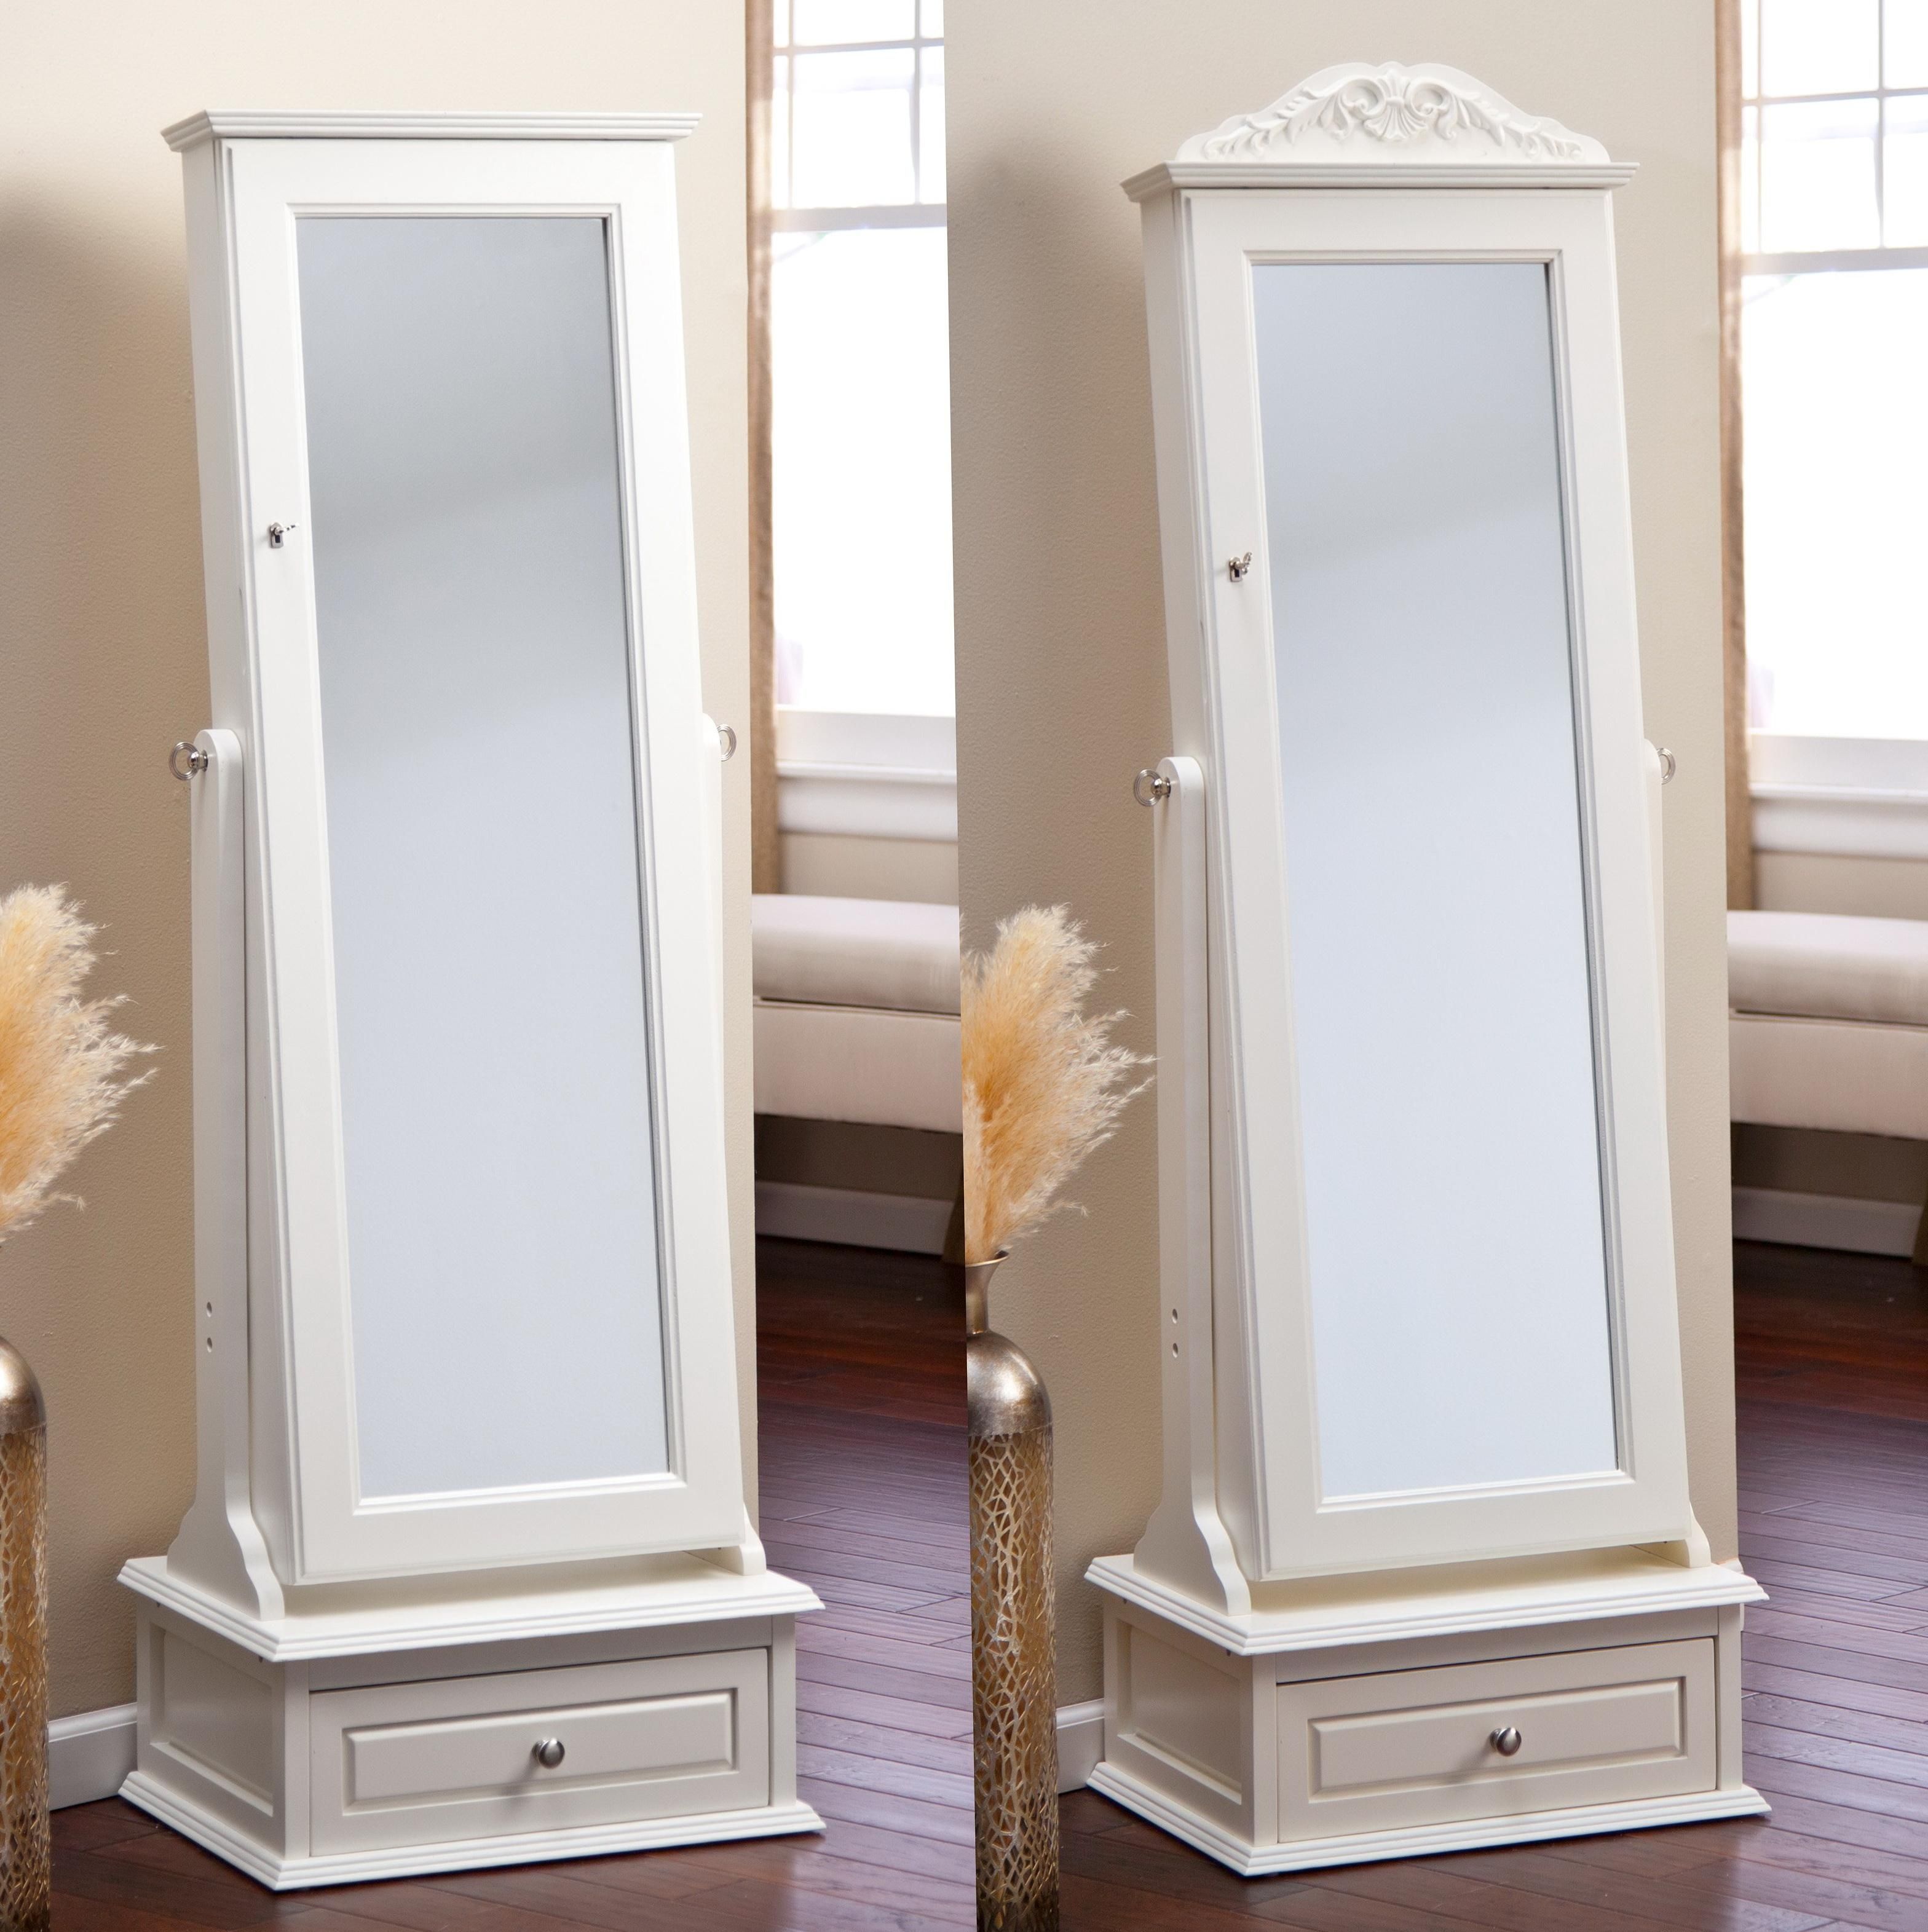 Furniture: Mesmerizing White Jewelry Armoire With Elegant Shaped With Regard To Cream Standing Mirror (View 4 of 20)